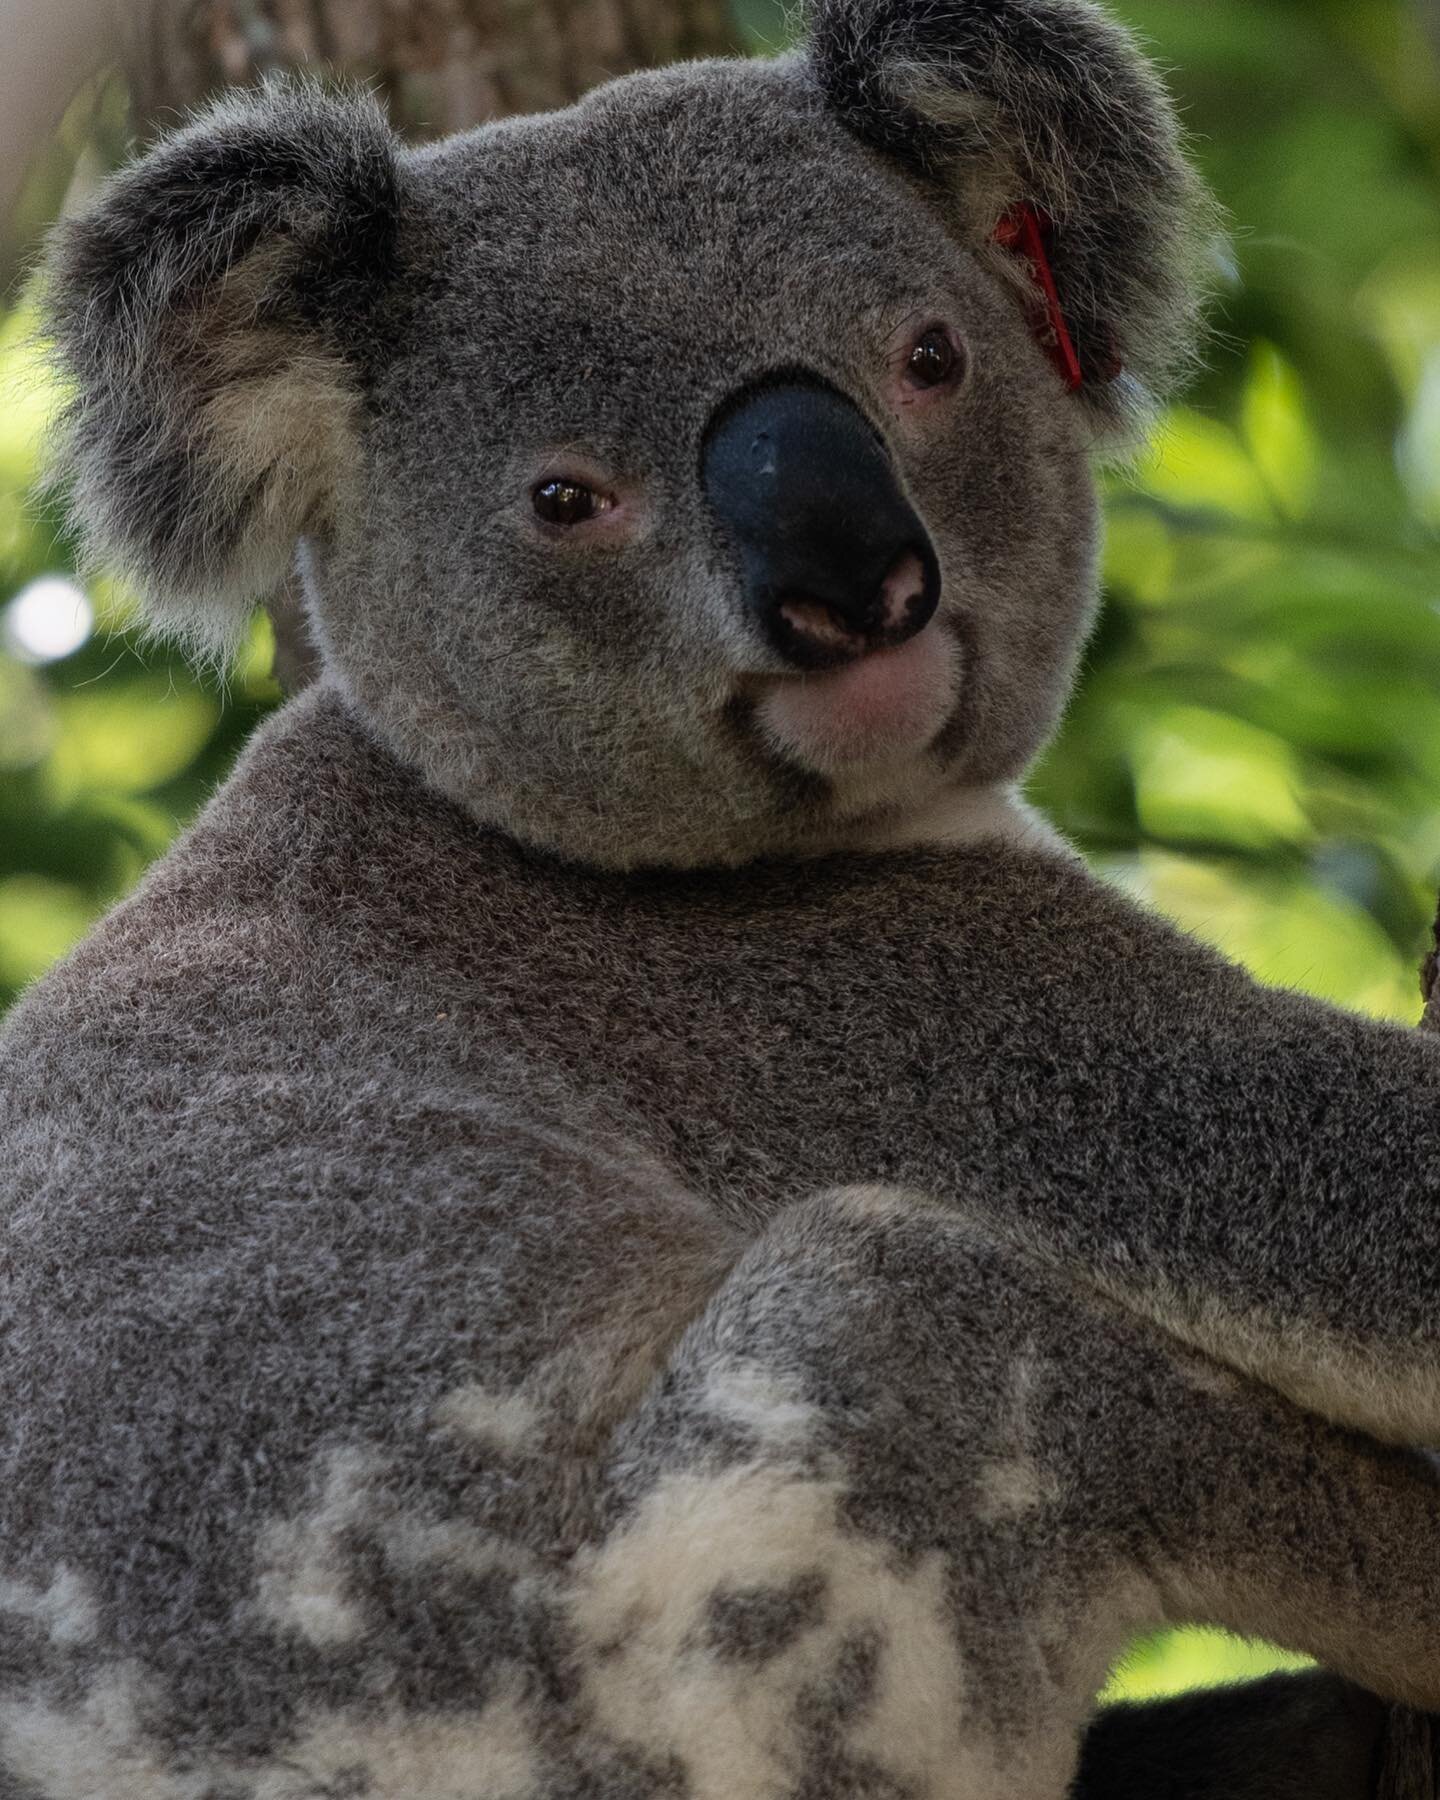 Meeting more of the neighbors at my new home in Bangalow. I have to say, living in a wild life corridor in Australia is pretty amazing. Koalas, pythons, platypuses, bats, birds, wallabies and more! This guy has been tagged by @friends_of_the_koala bu